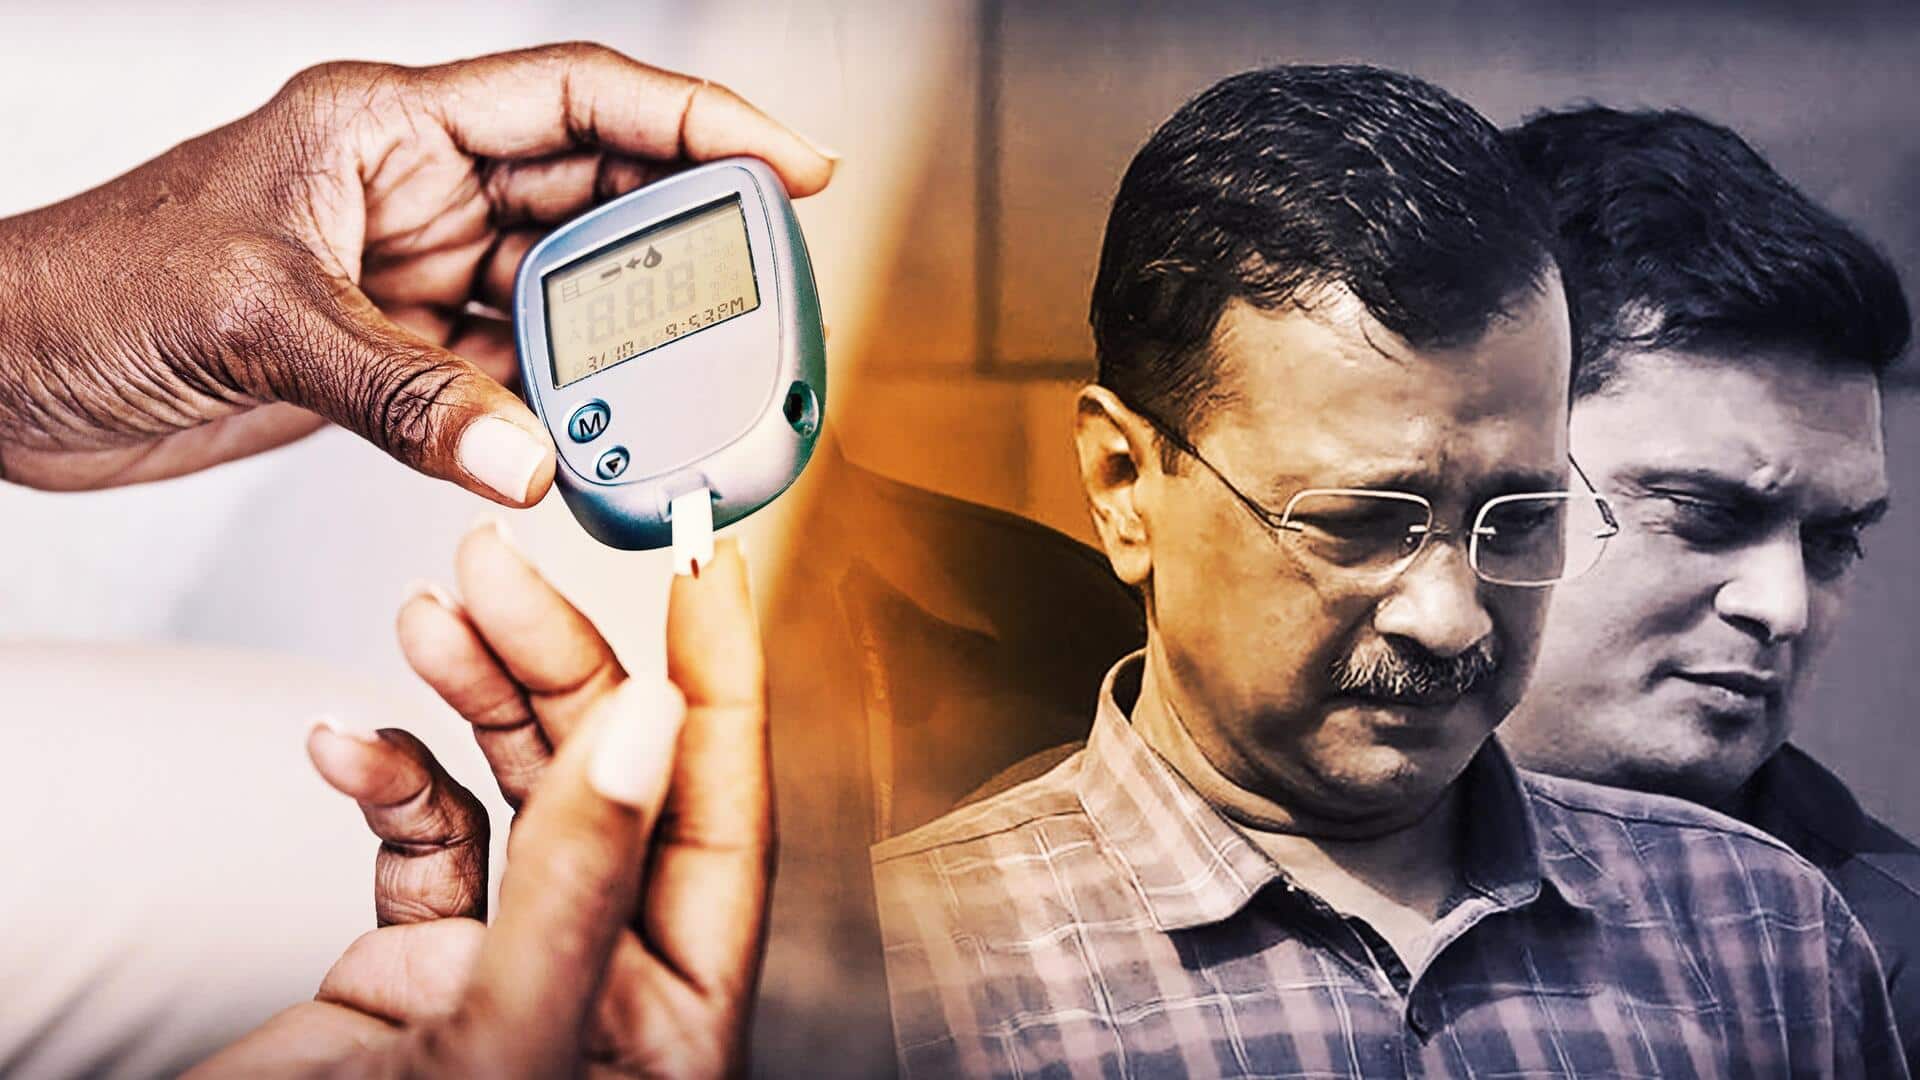 Kejriwal eating sweets: ED on CM's plea to consult doctor